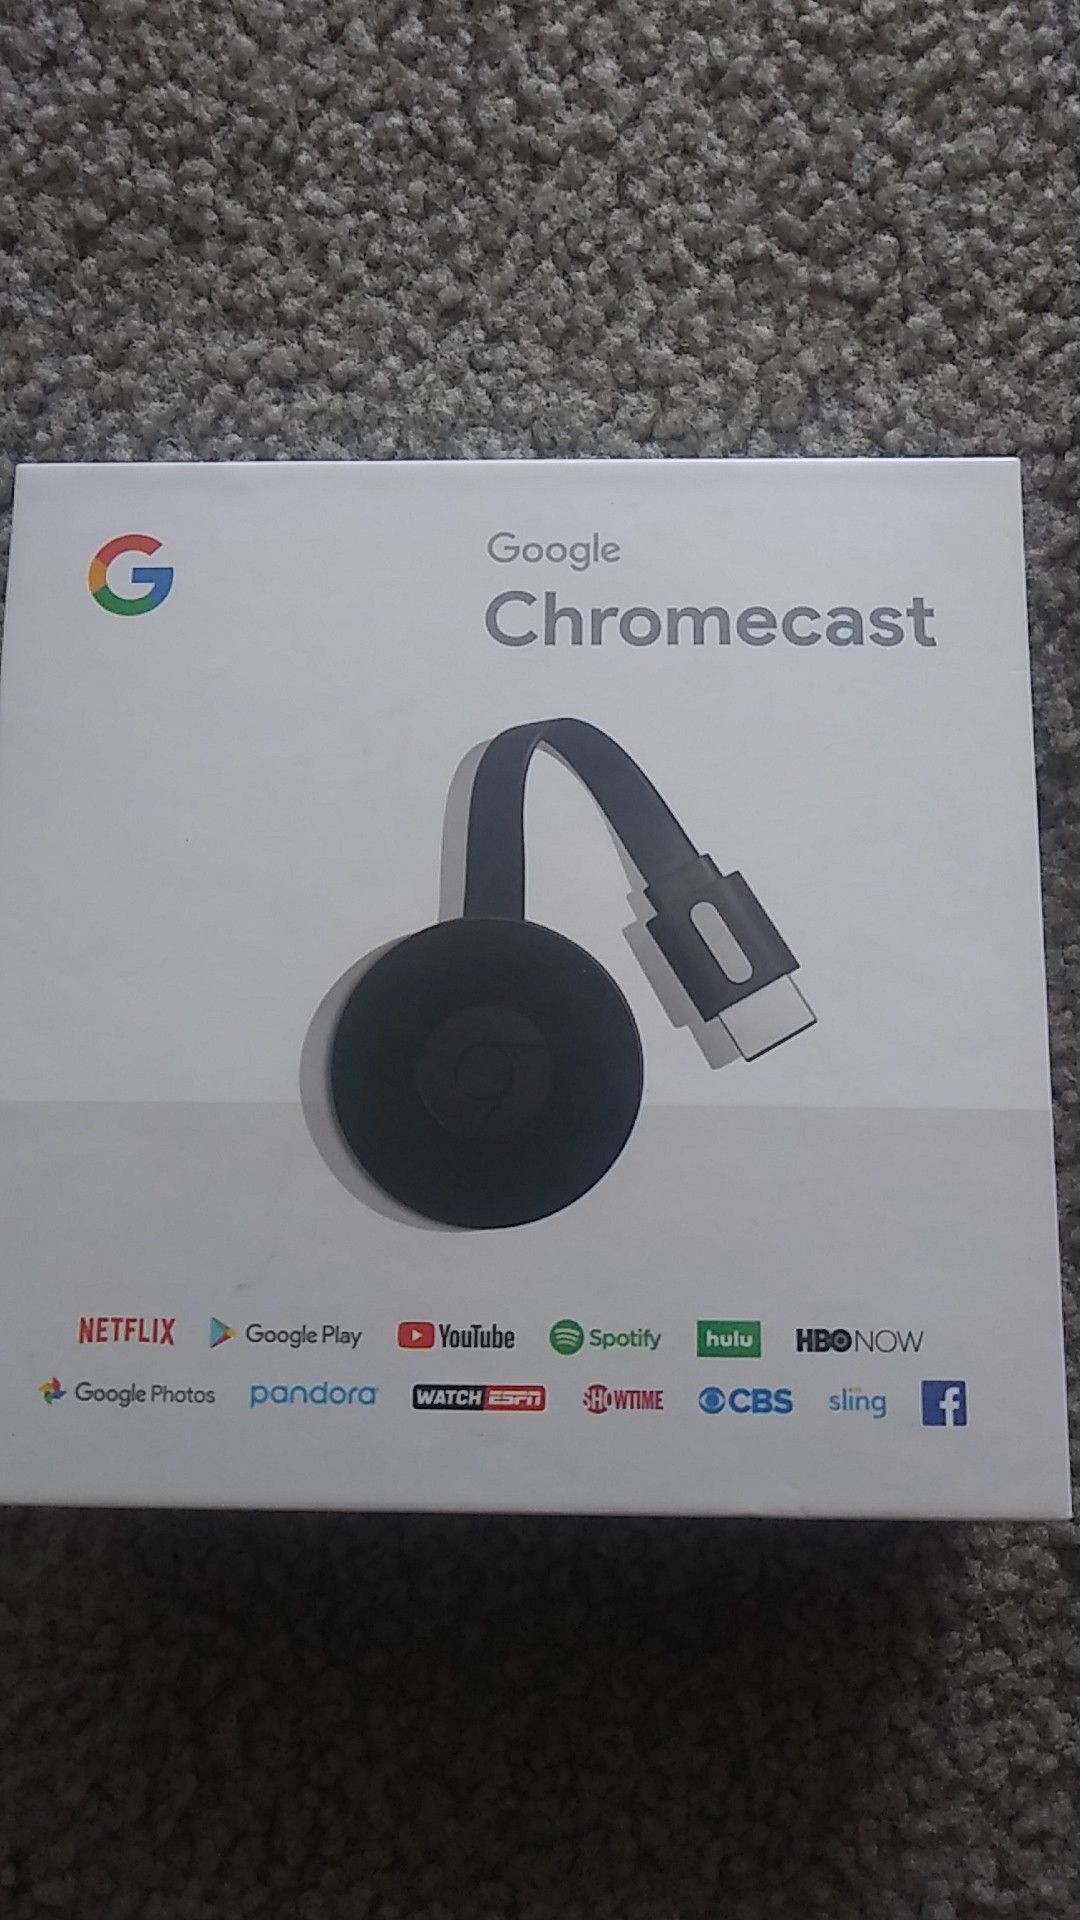 Google's Chromecast Brand New Will trade for 6 Recent Ps4 Games